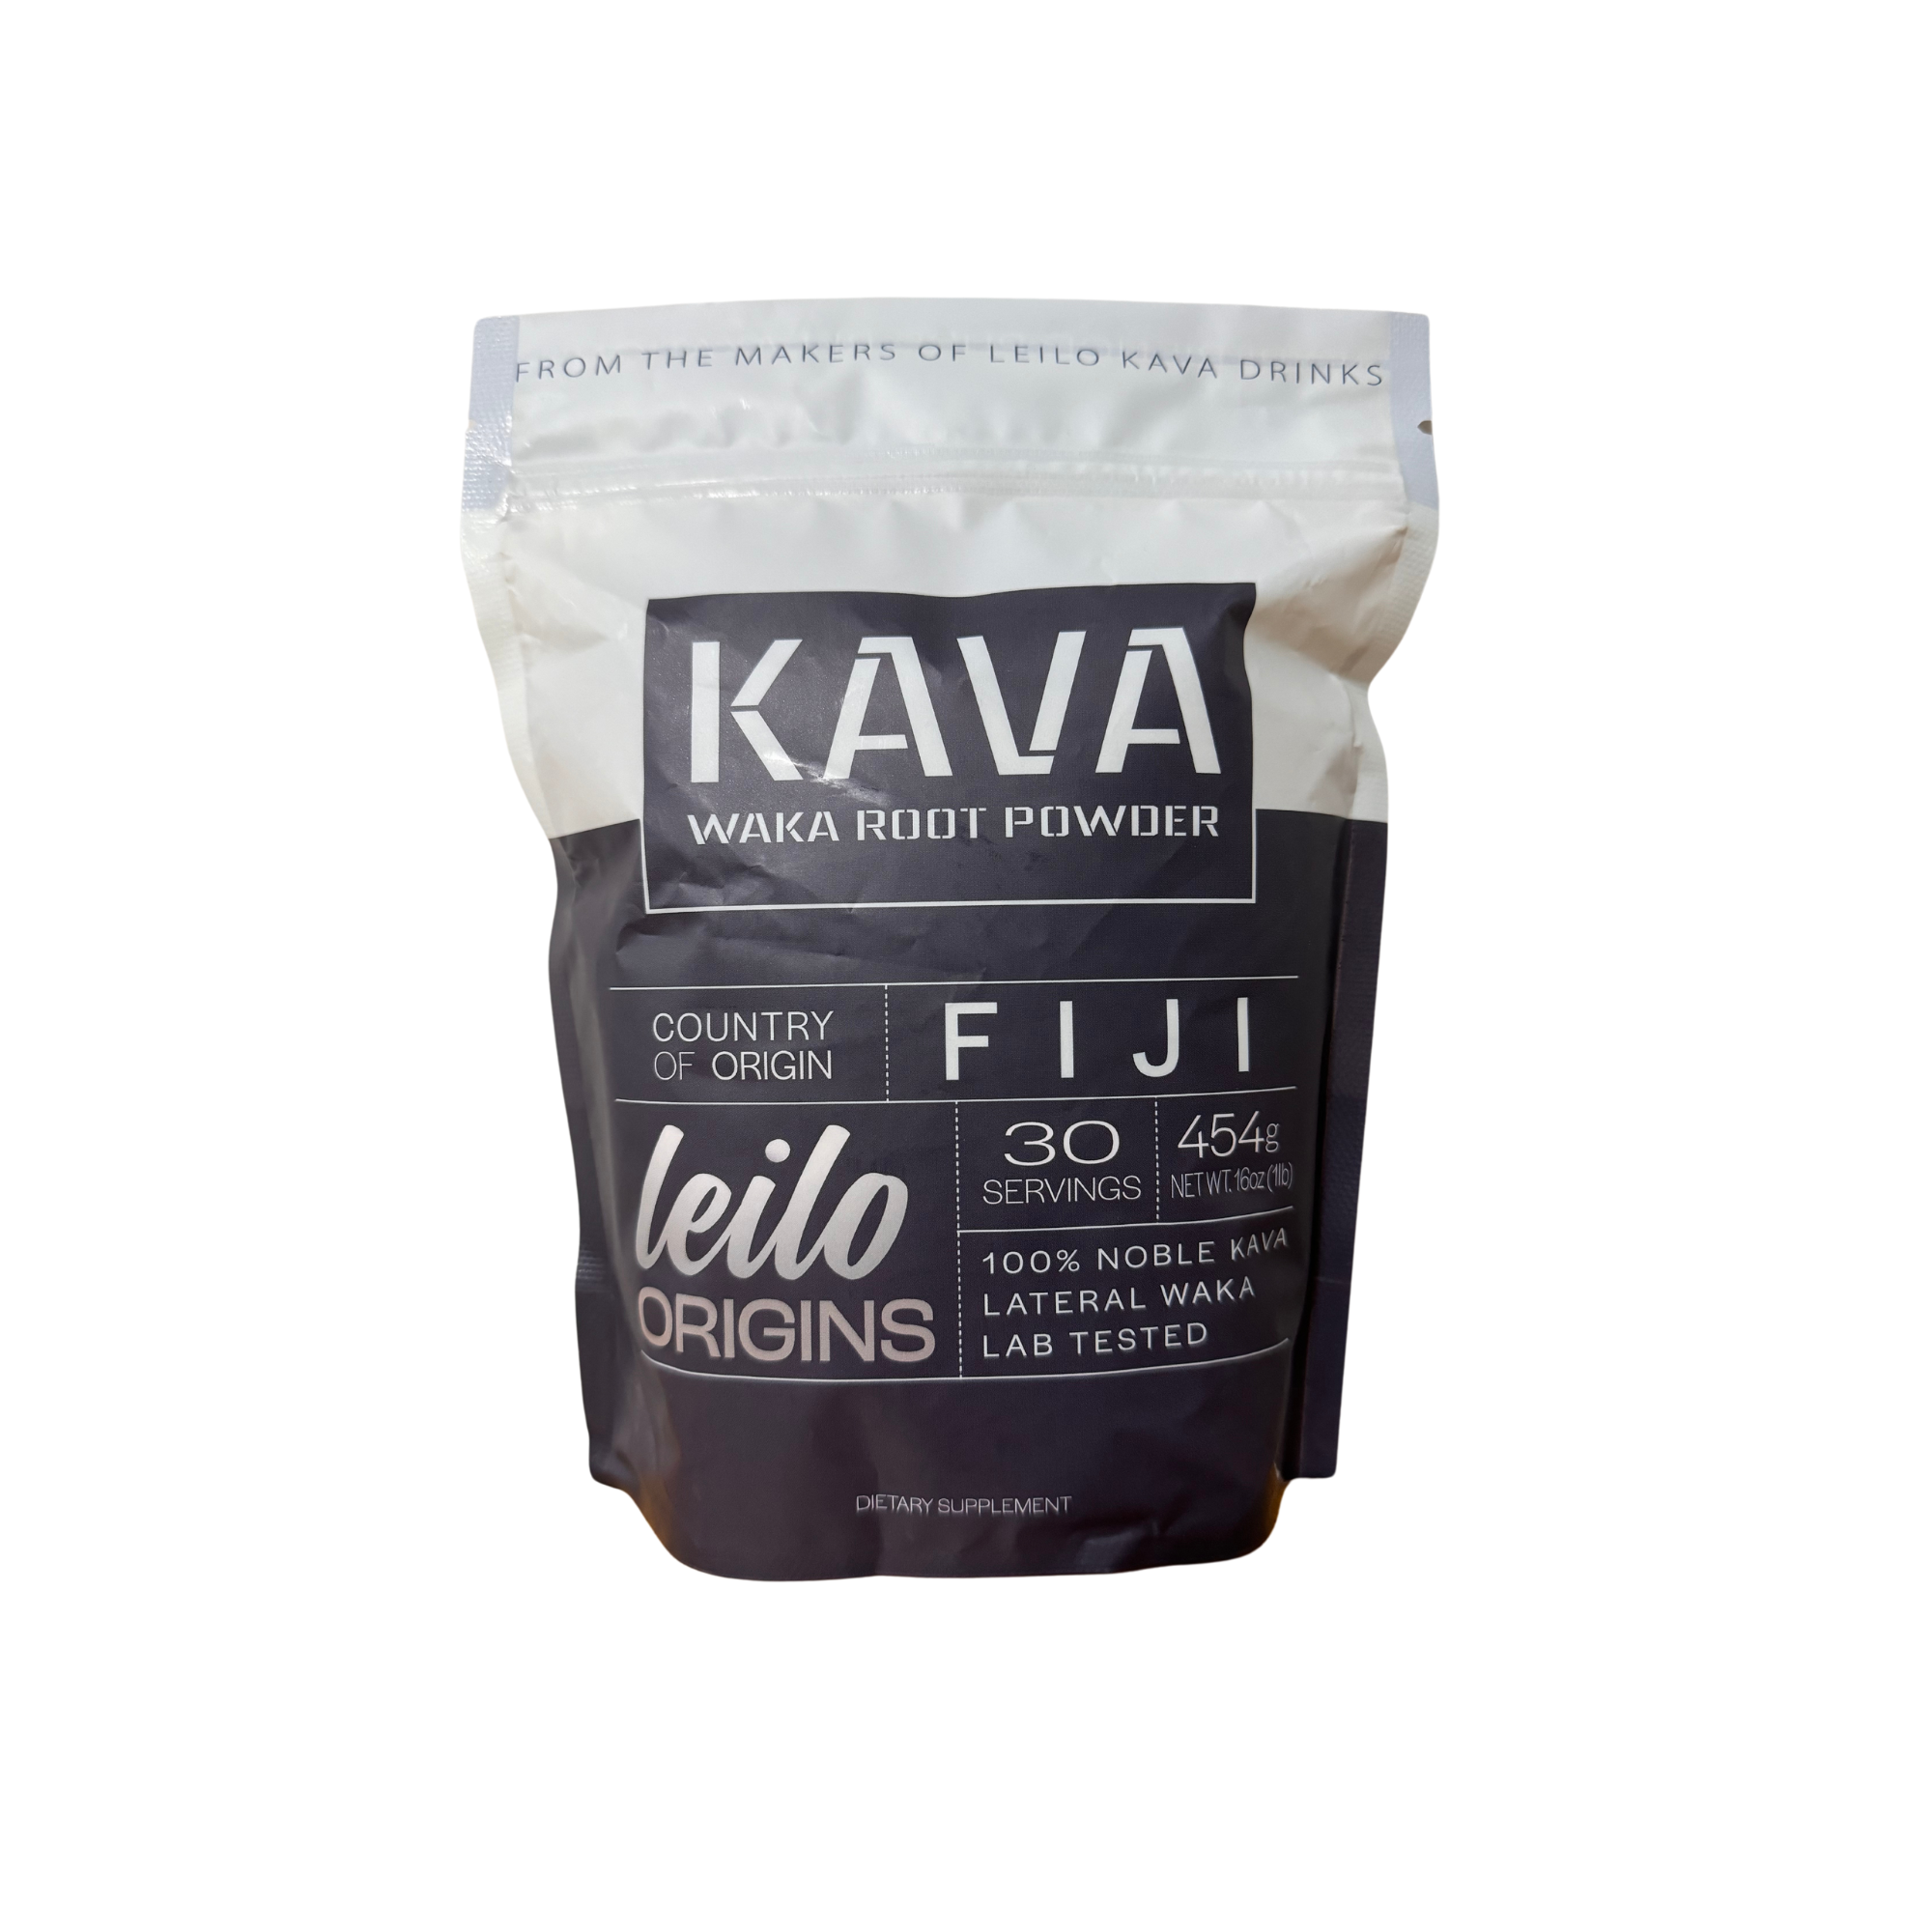 A bag of Kava Waka Root Powder from Fiji, labeled as a dietary supplement.